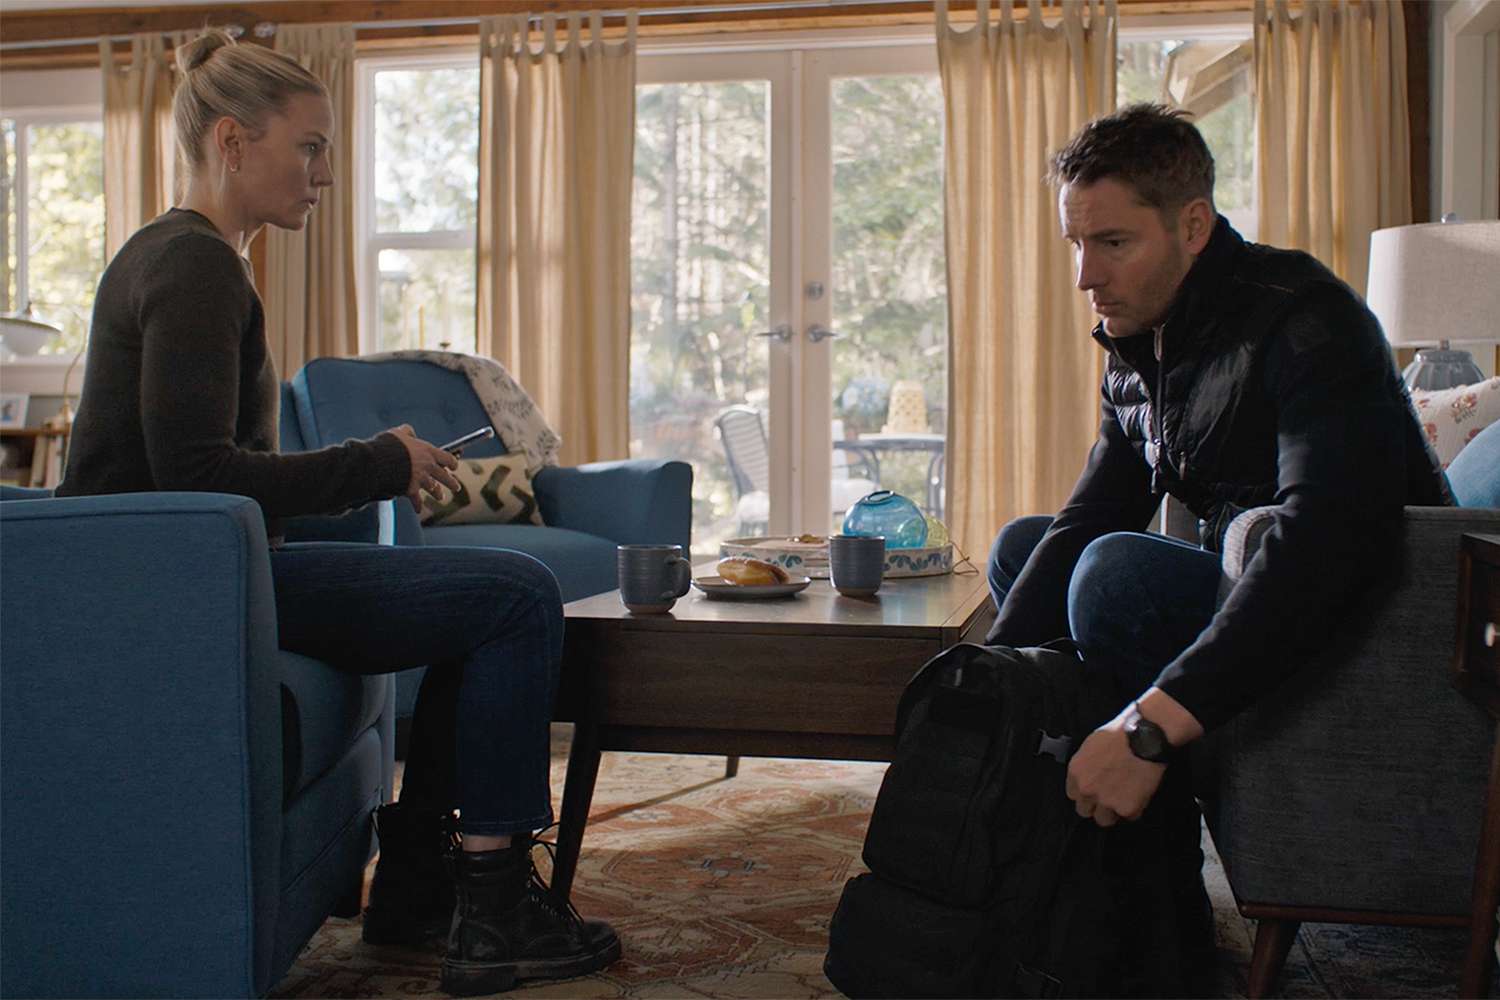 Justin Hartley Has Another This Is Us Reunion on 'Tracker' with Jennifer Morrison — See Their Moving Scene! (Exclusive)